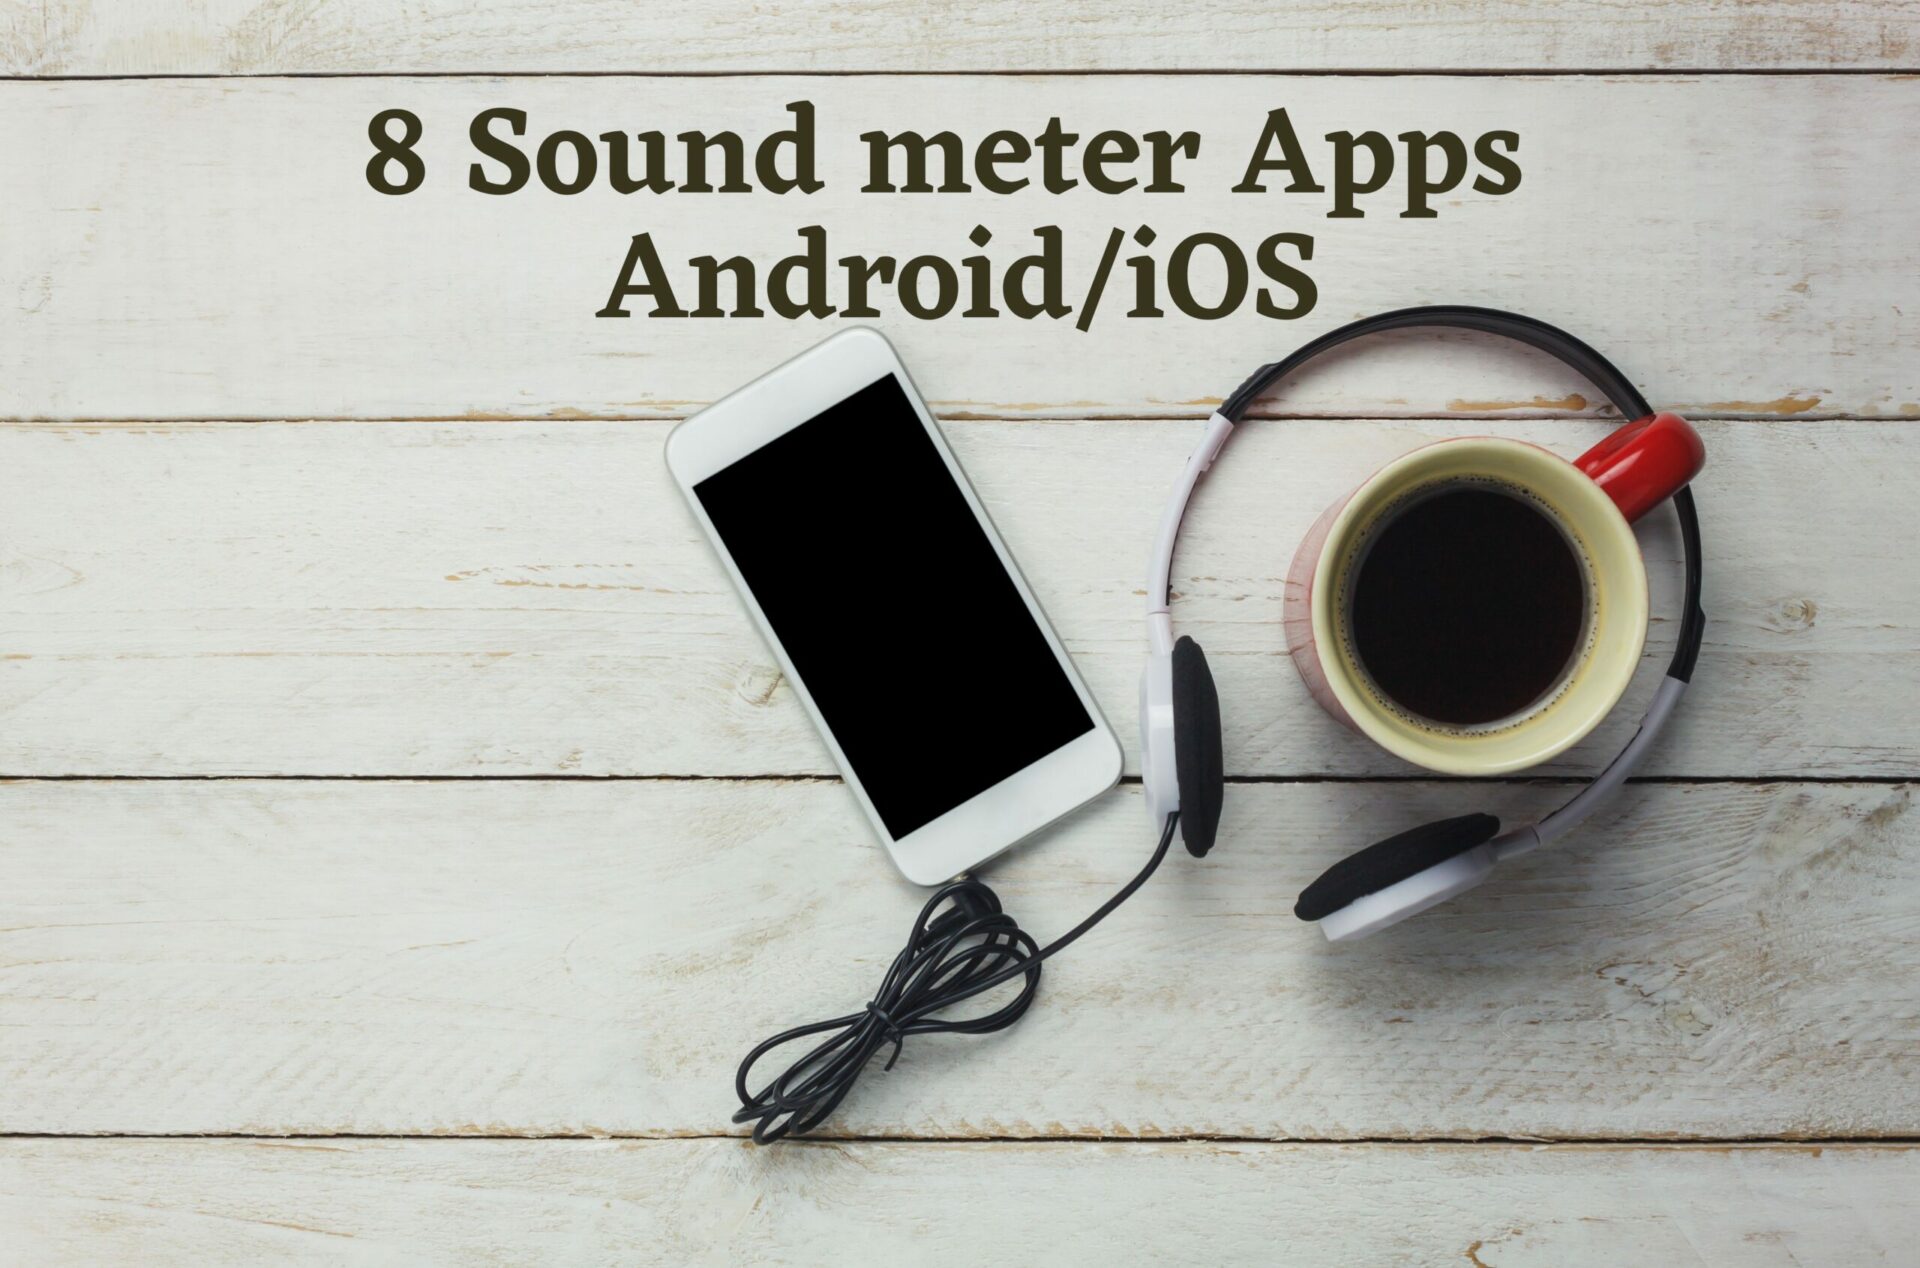 8 Best Sound meter apps Android/iOS